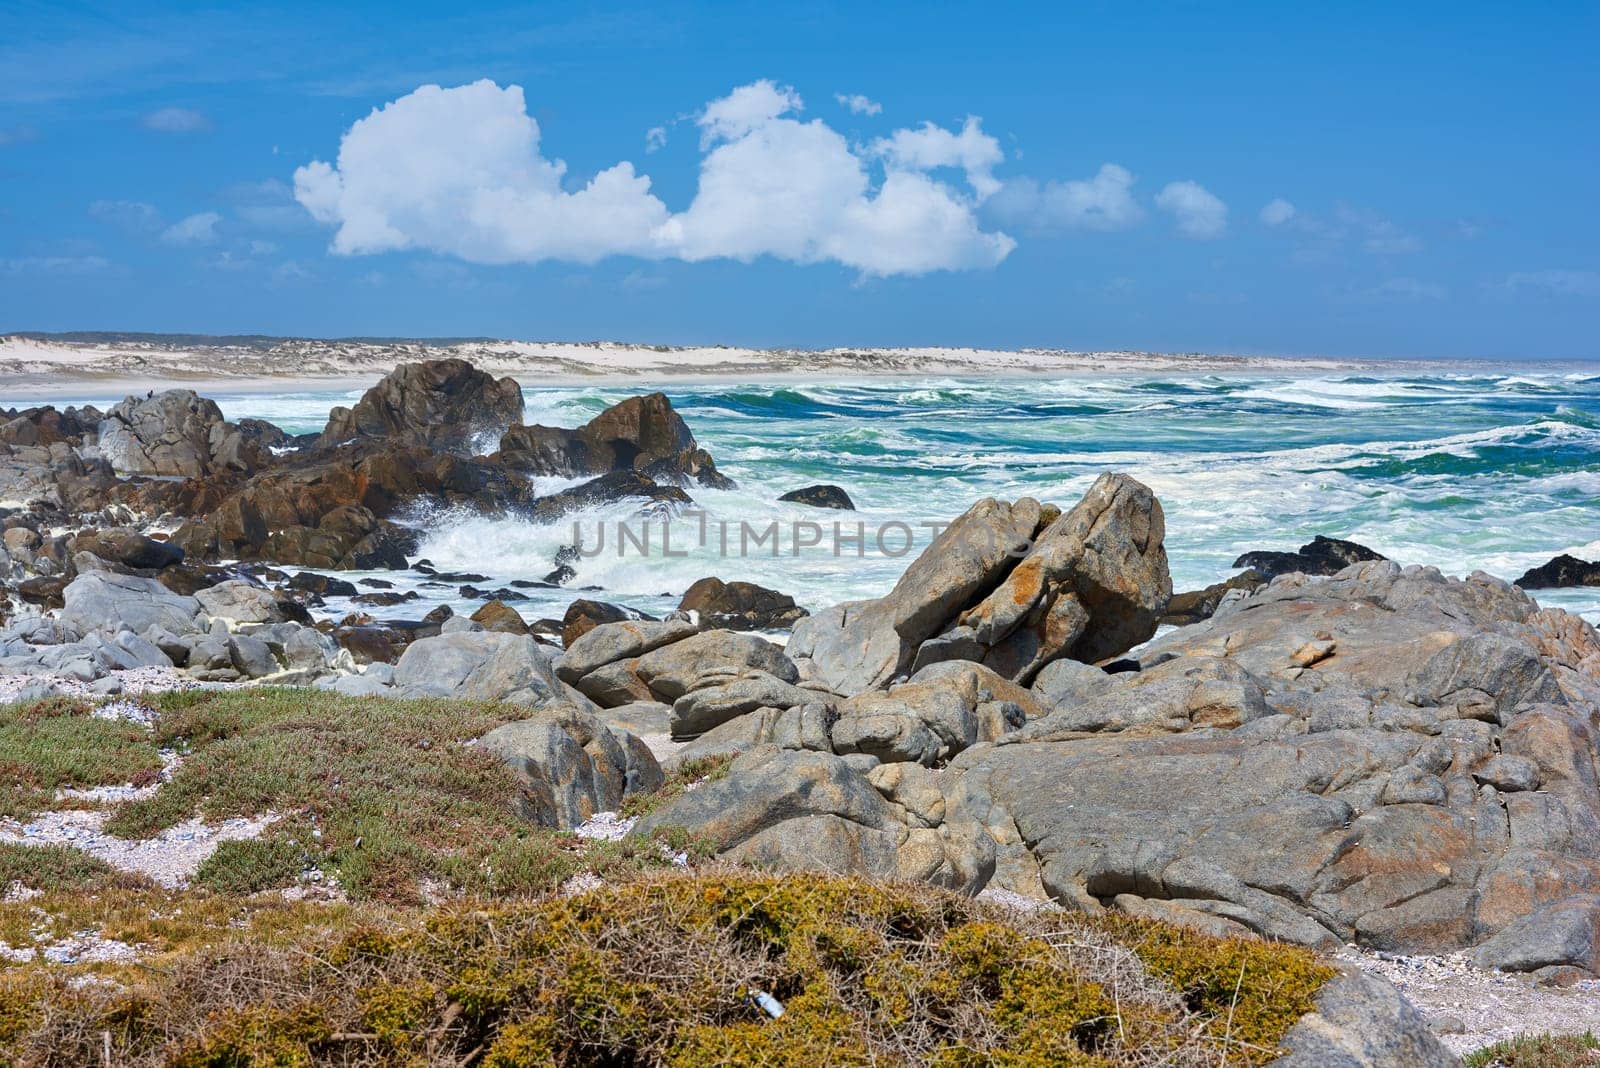 Beach, rocks and sea waves on coast for summer vacation or holiday traveling, swimming or environment. Ocean, boulders and grass in California for exploring with tropical island, foliage or nature.